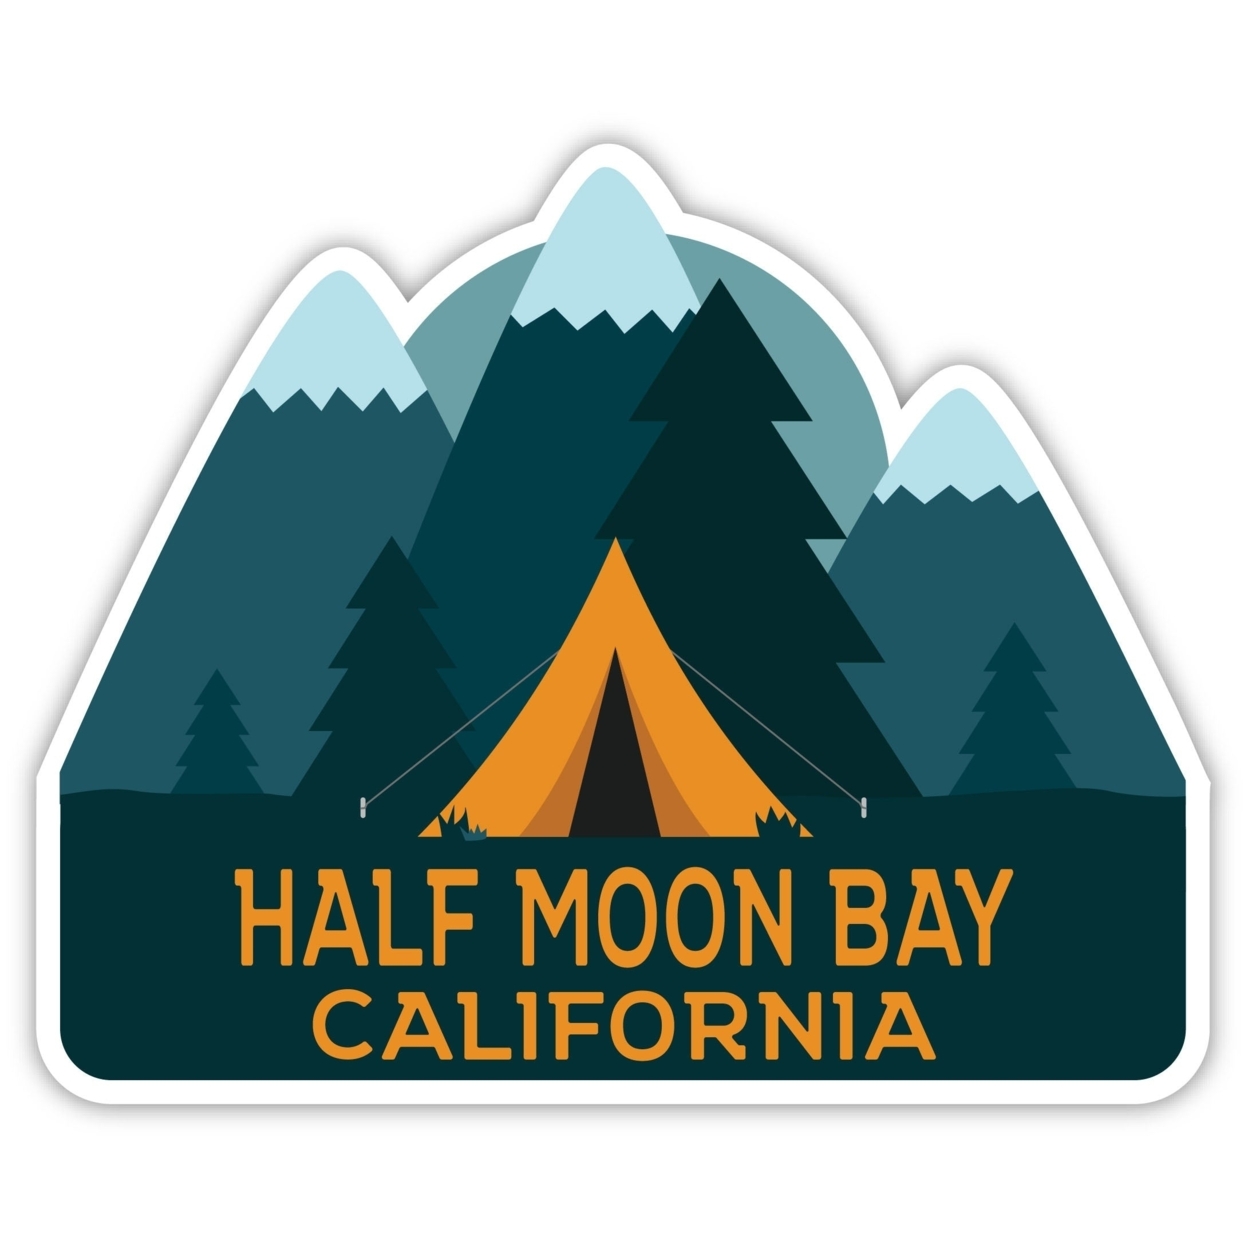 Half Moon Bay California Souvenir Decorative Stickers (Choose Theme And Size) - 4-Pack, 4-Inch, Bear